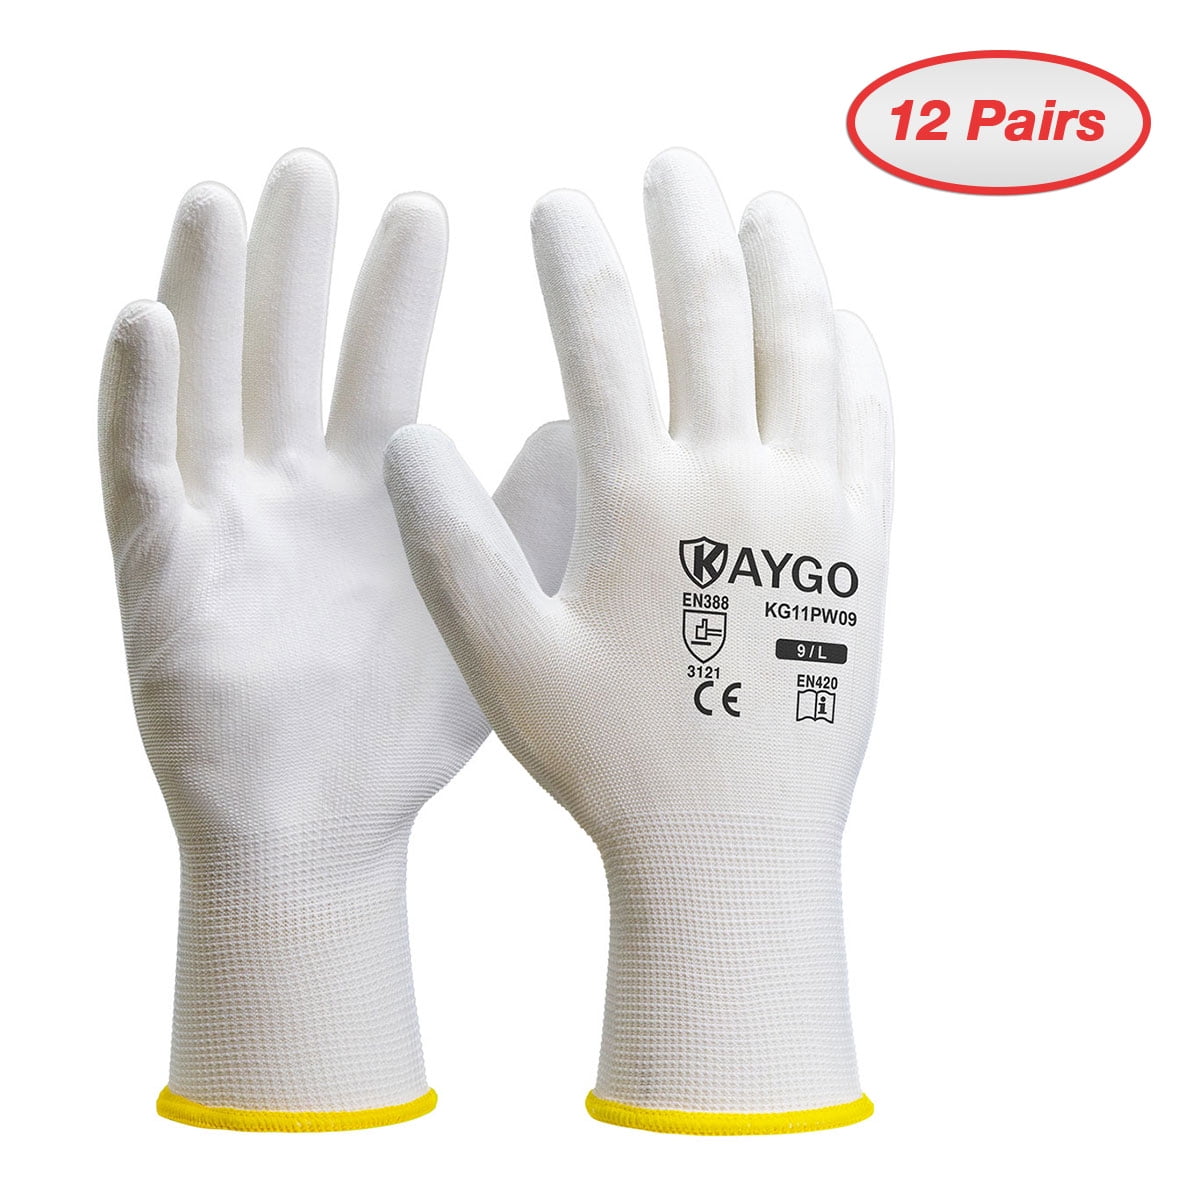 KAYGO Safety Work Gloves PU Coated-12 Pairs, KG11PB, Seamless Knit Glove  with Polyurethane Coated Smooth Grip on Palm & Fingers, for Men and Women,  Ideal for General Duty Work (Large, White) 